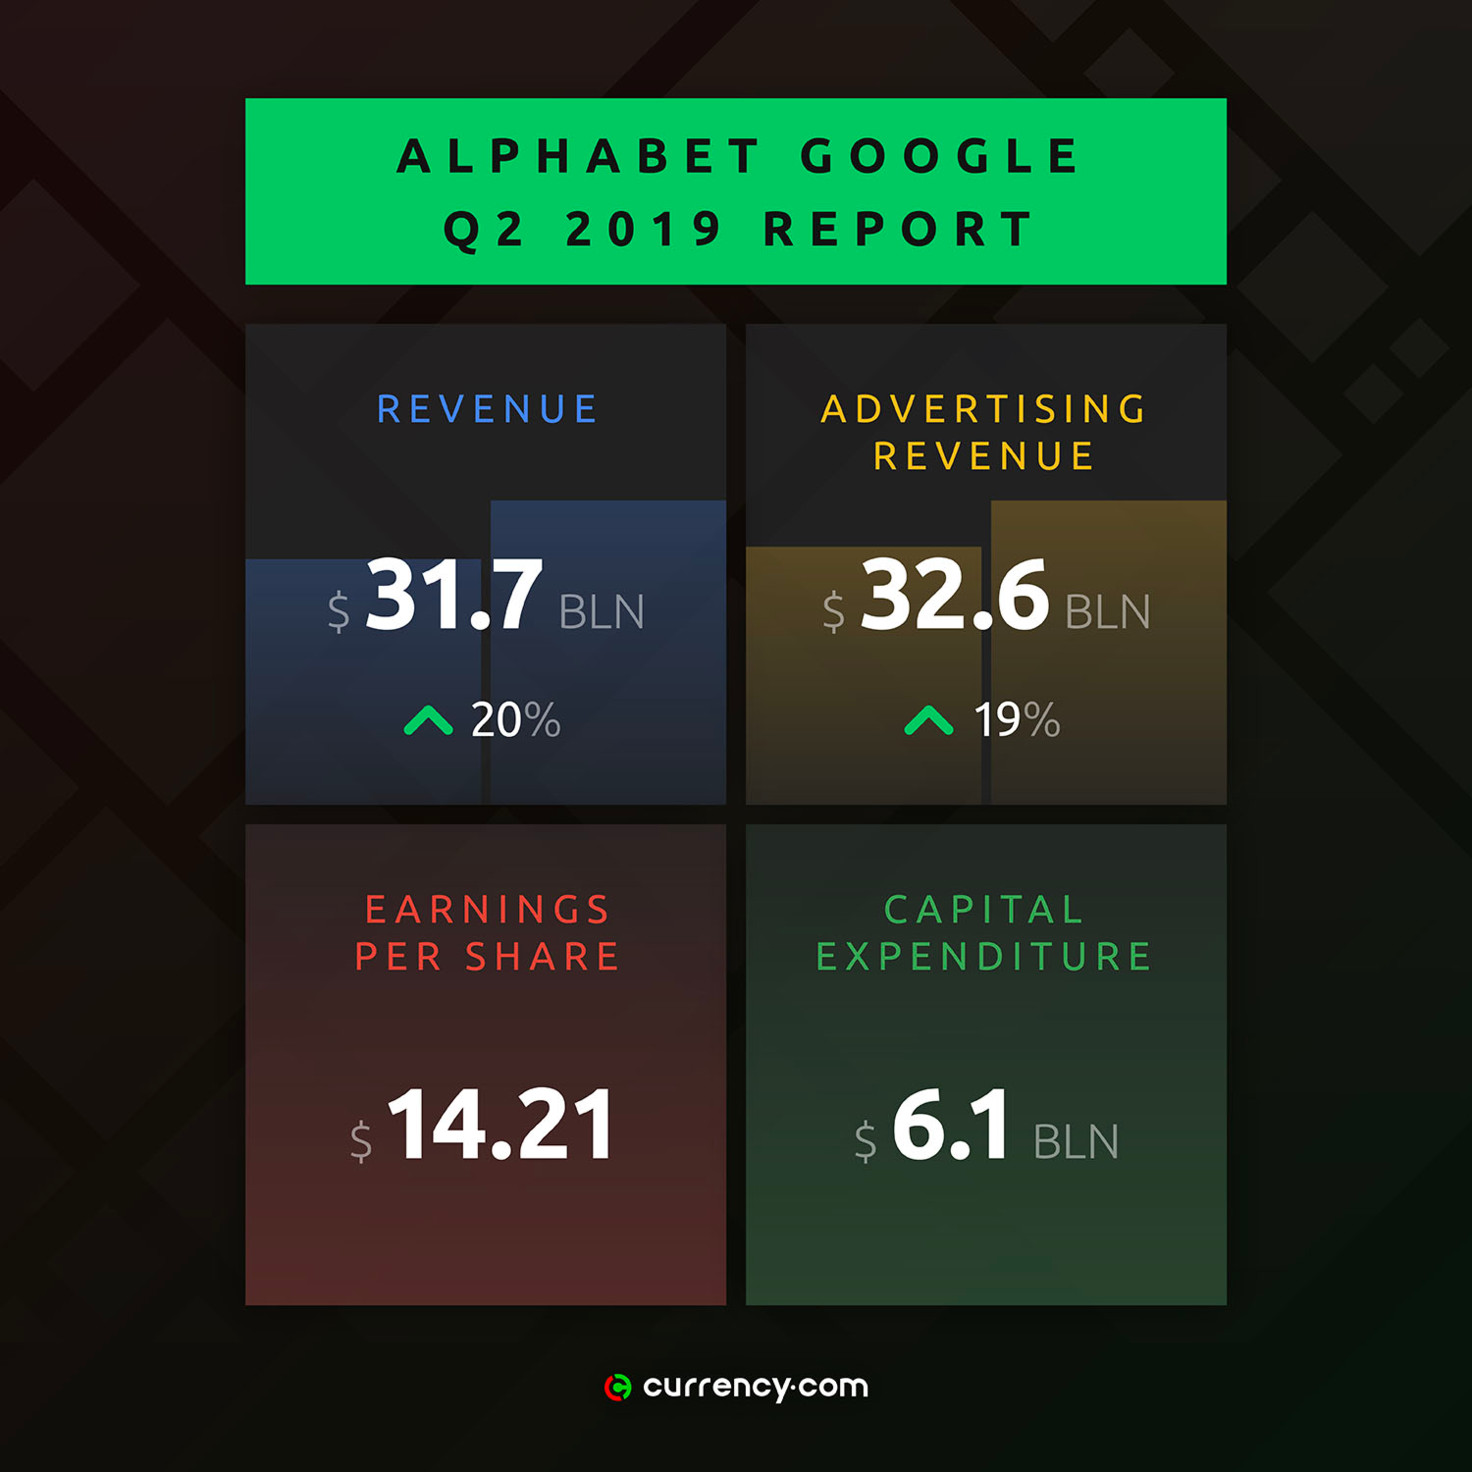 Alphabet Stock Rises as Company Reports Surprising Q2 2019 Earnings